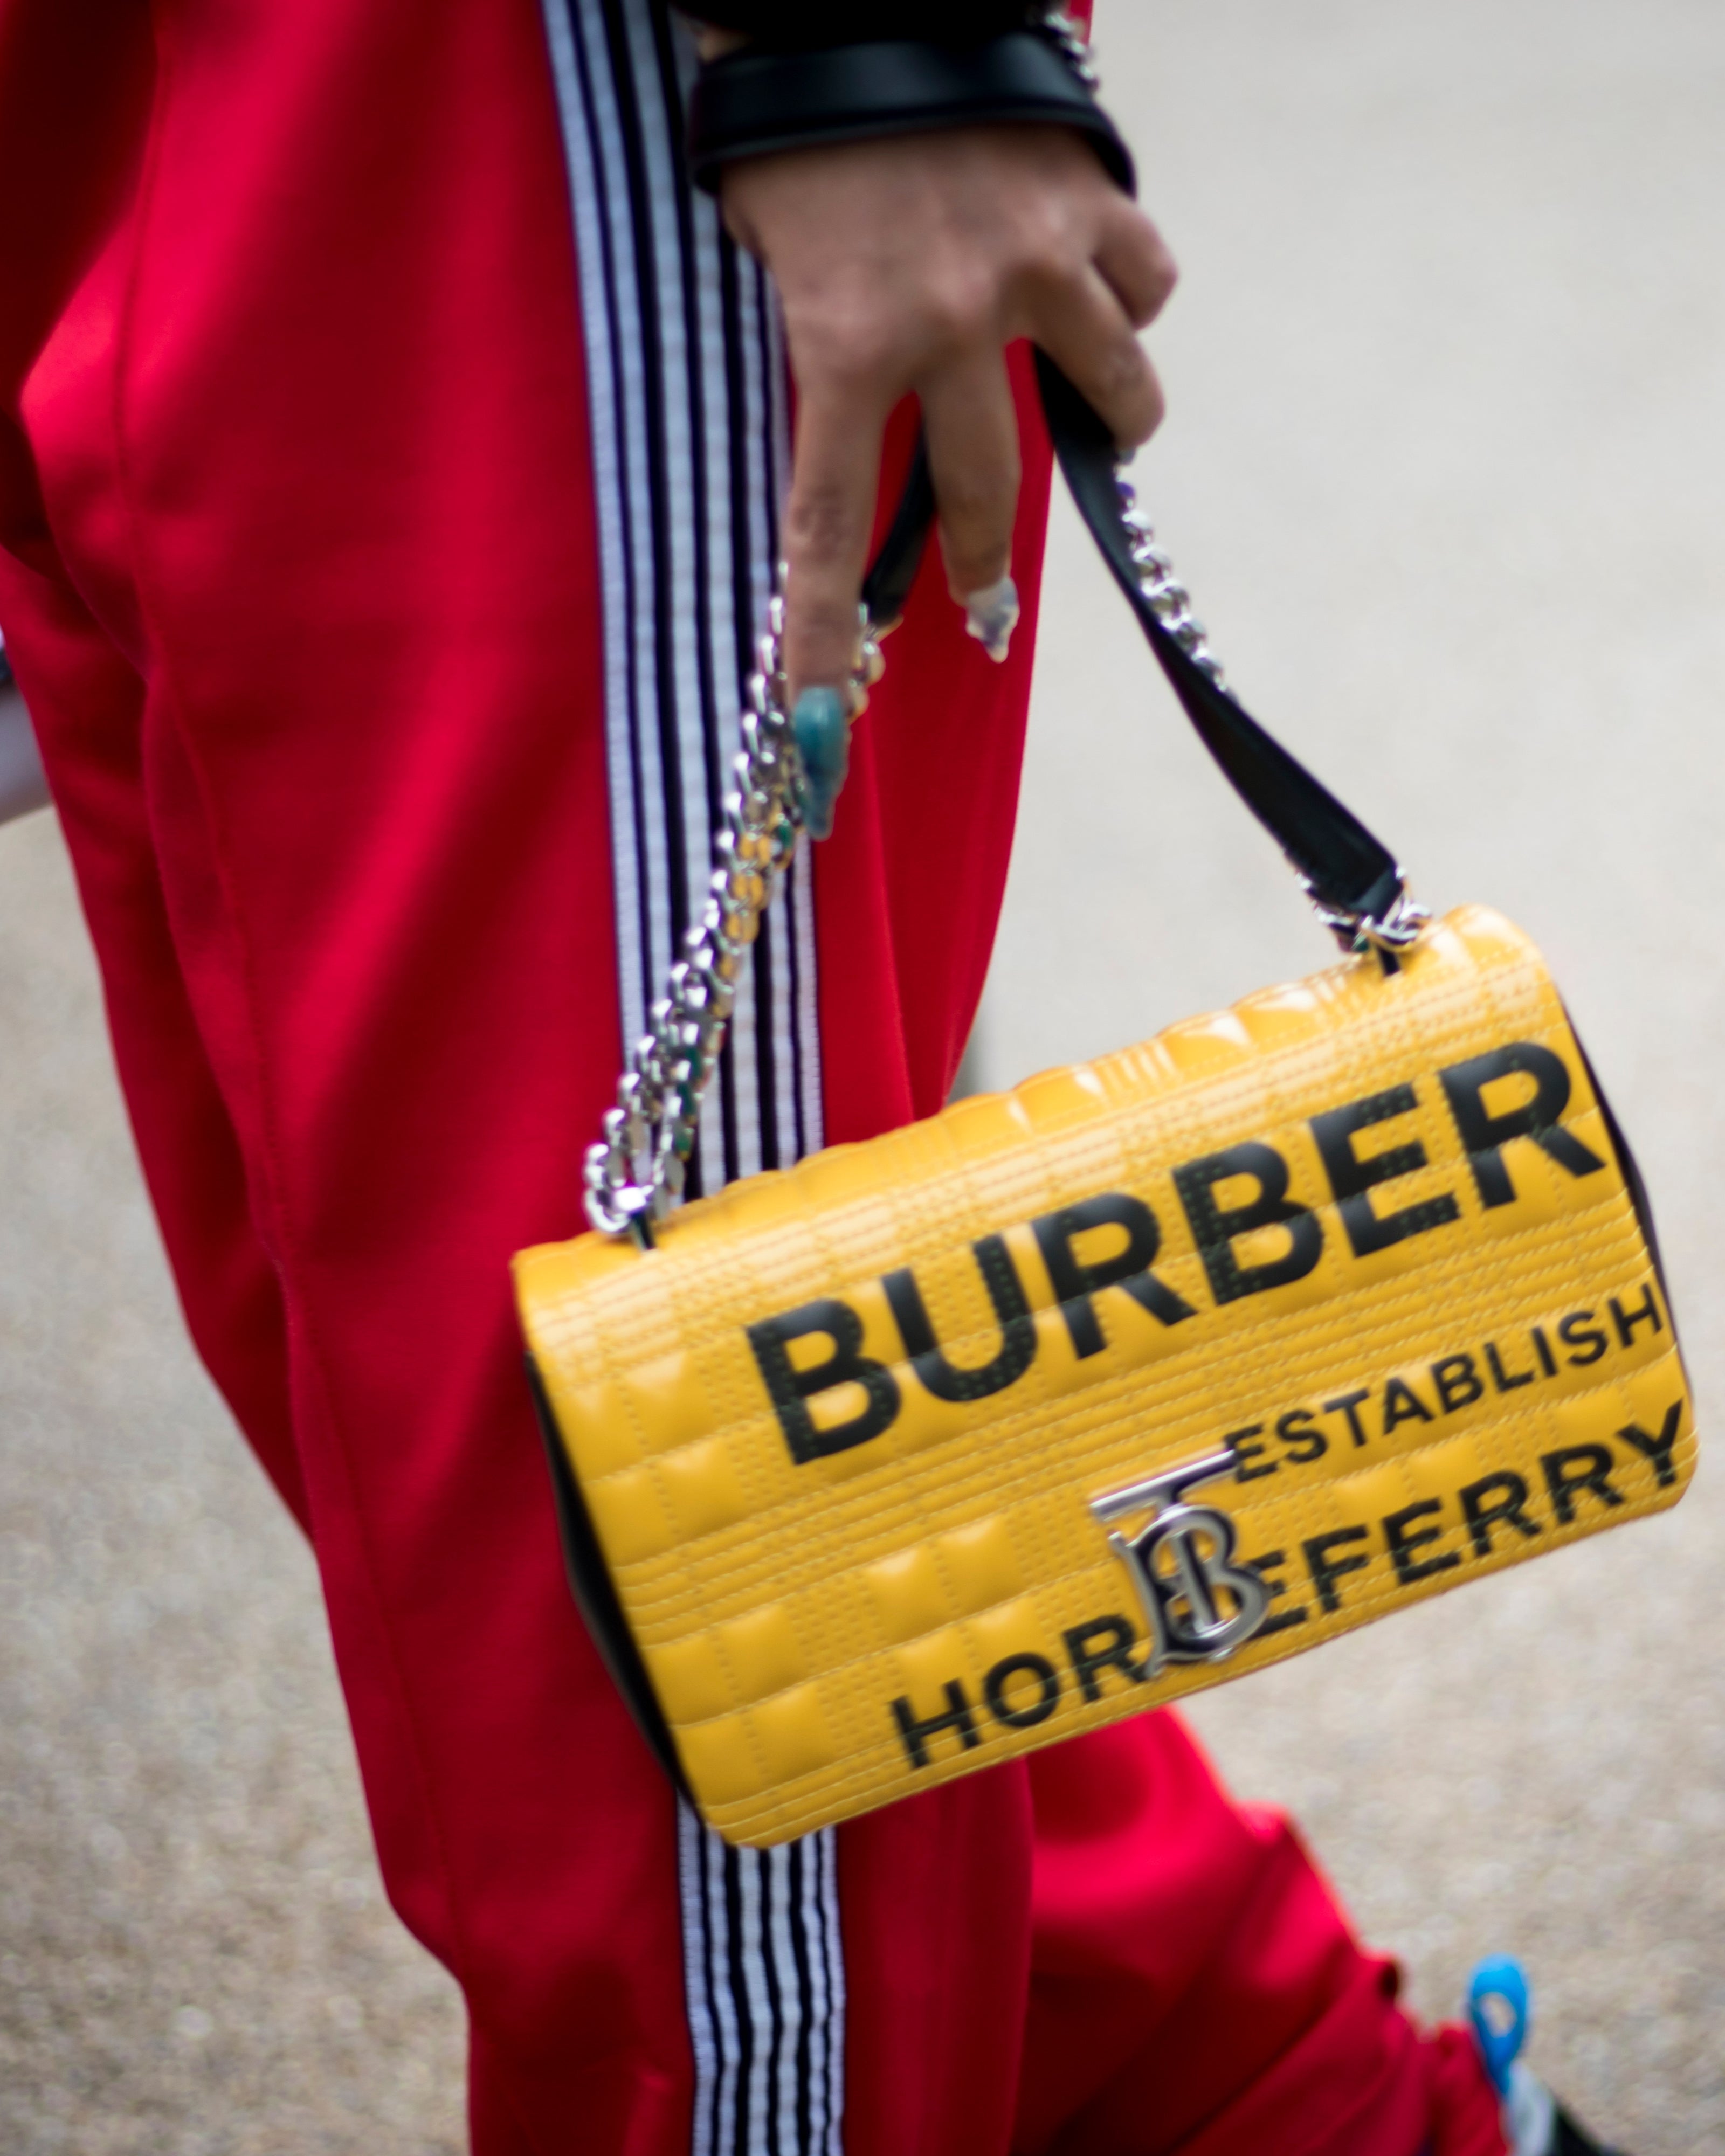 Burberry Small Lola Bag, what do you think? Is the quality good